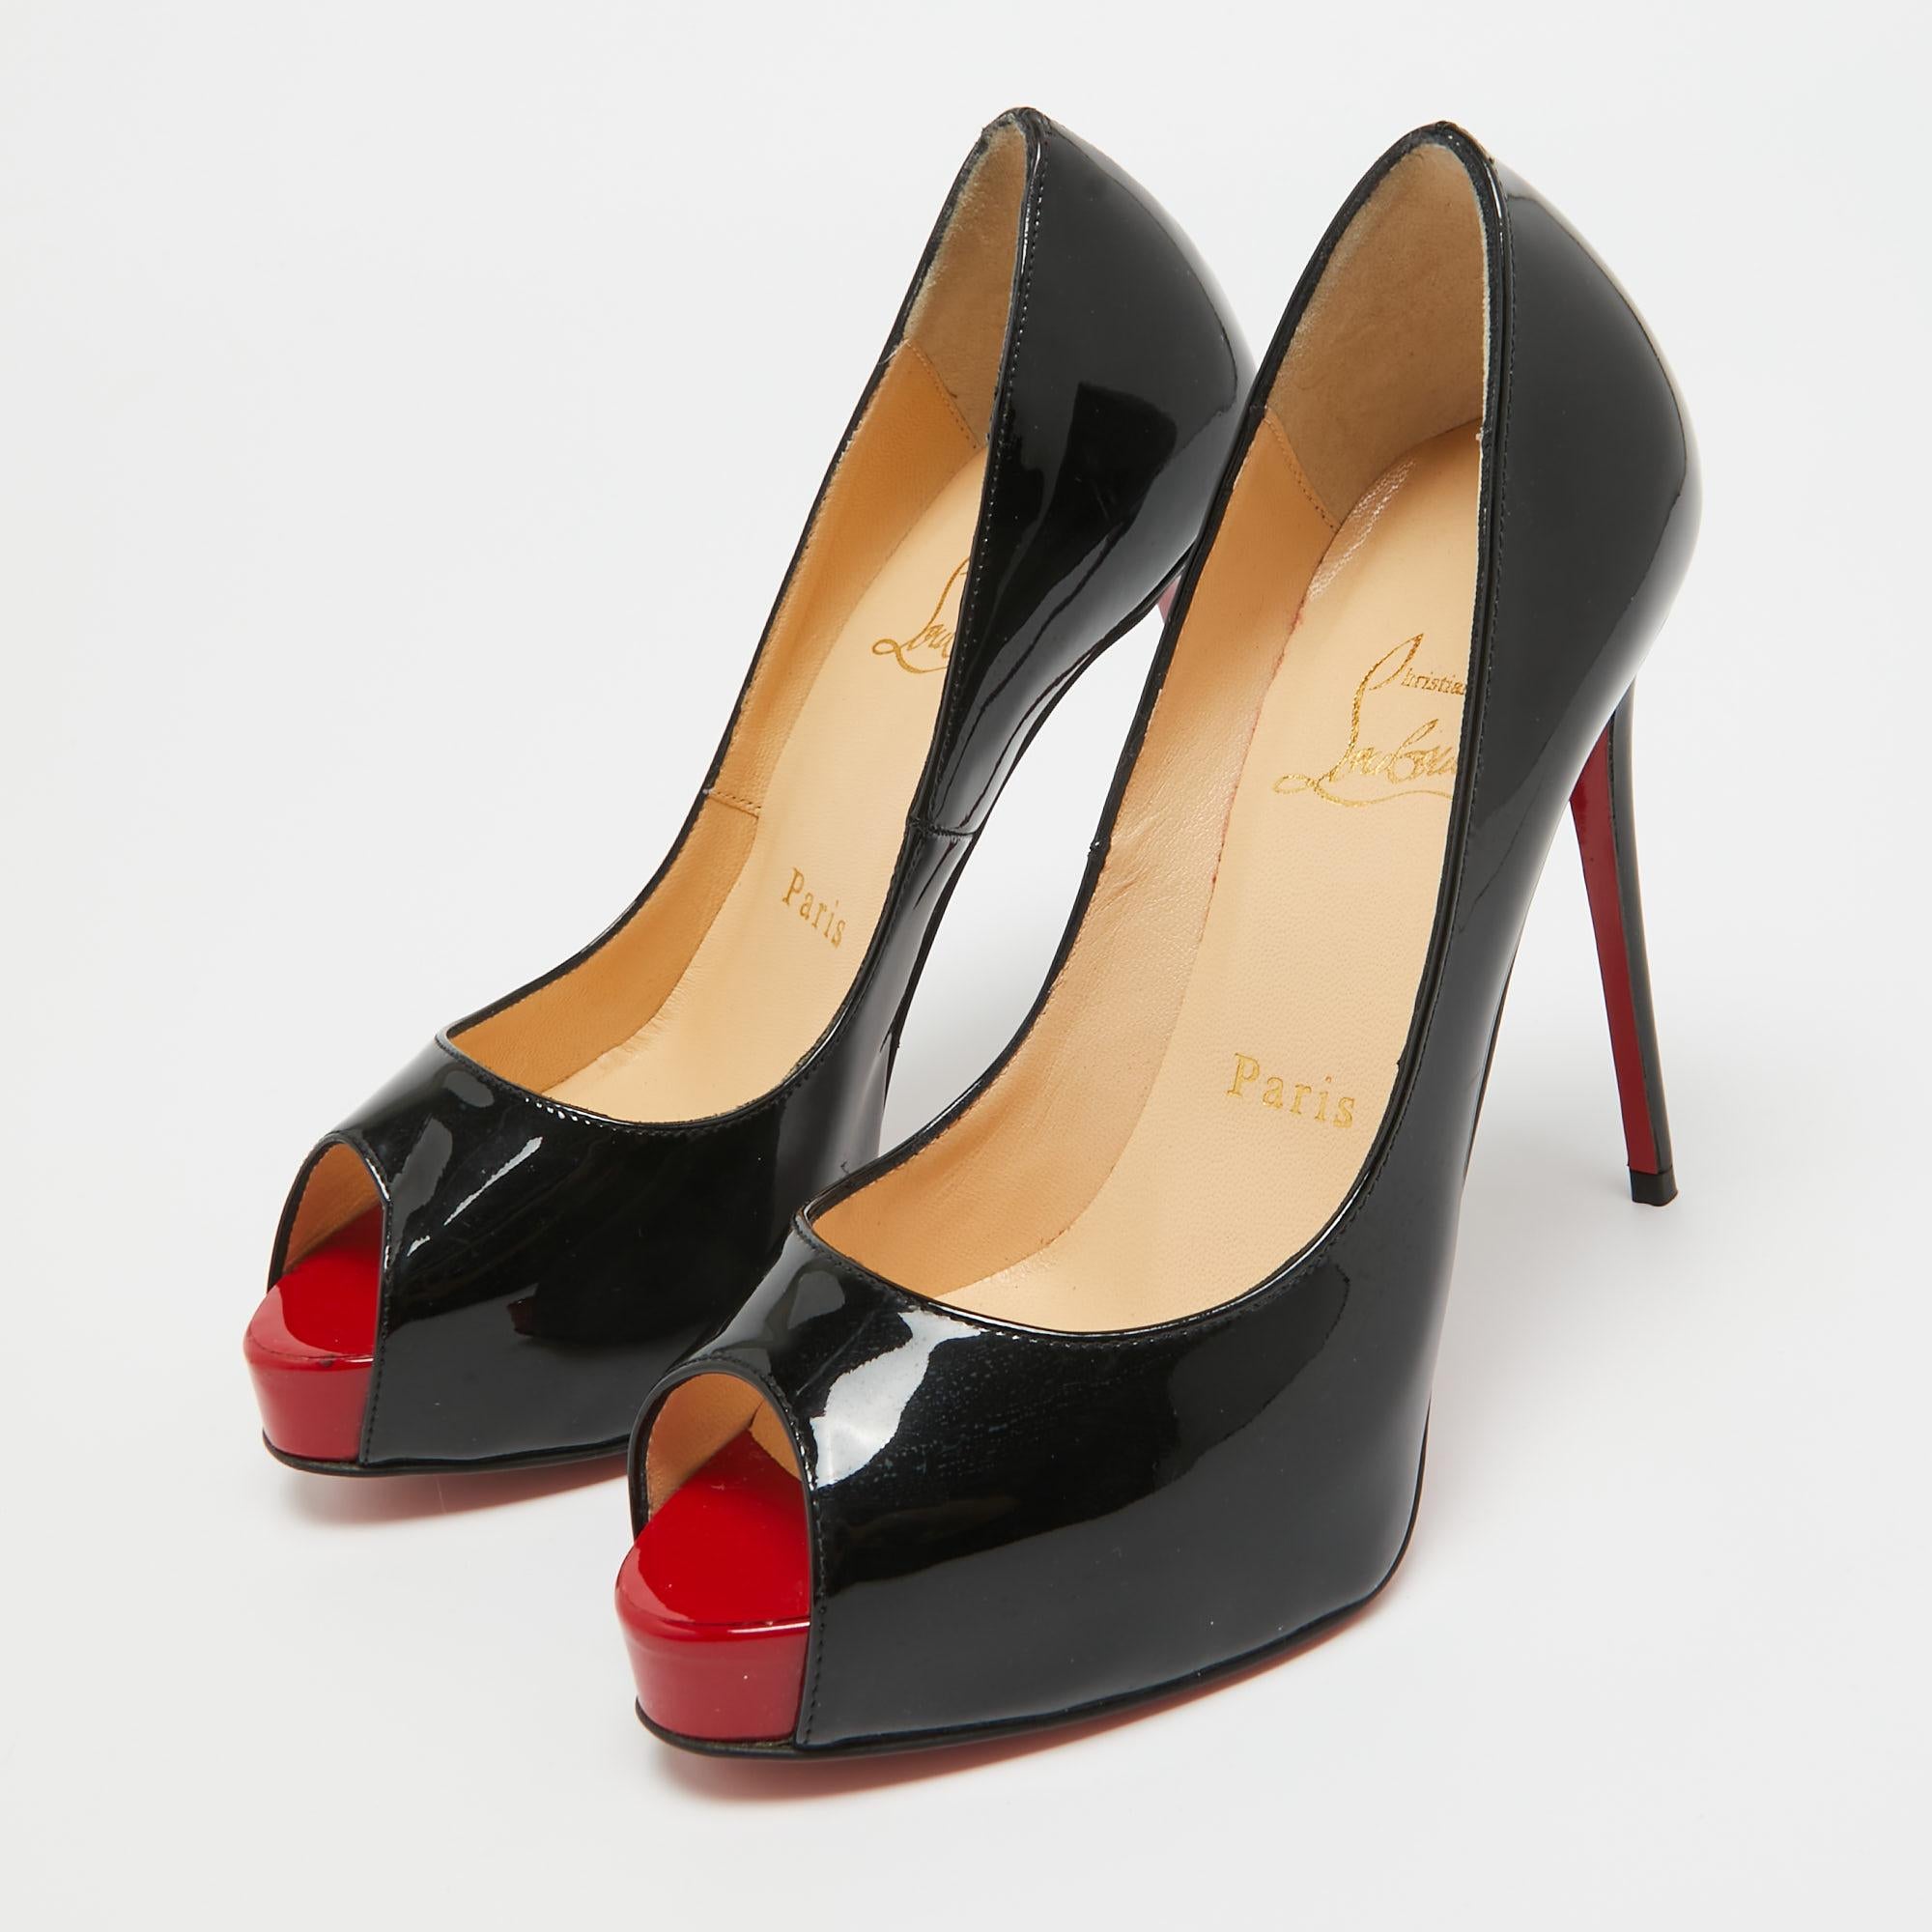 Women's Christian Louboutin Black Patent Leather Very Prive Pumps Size 34